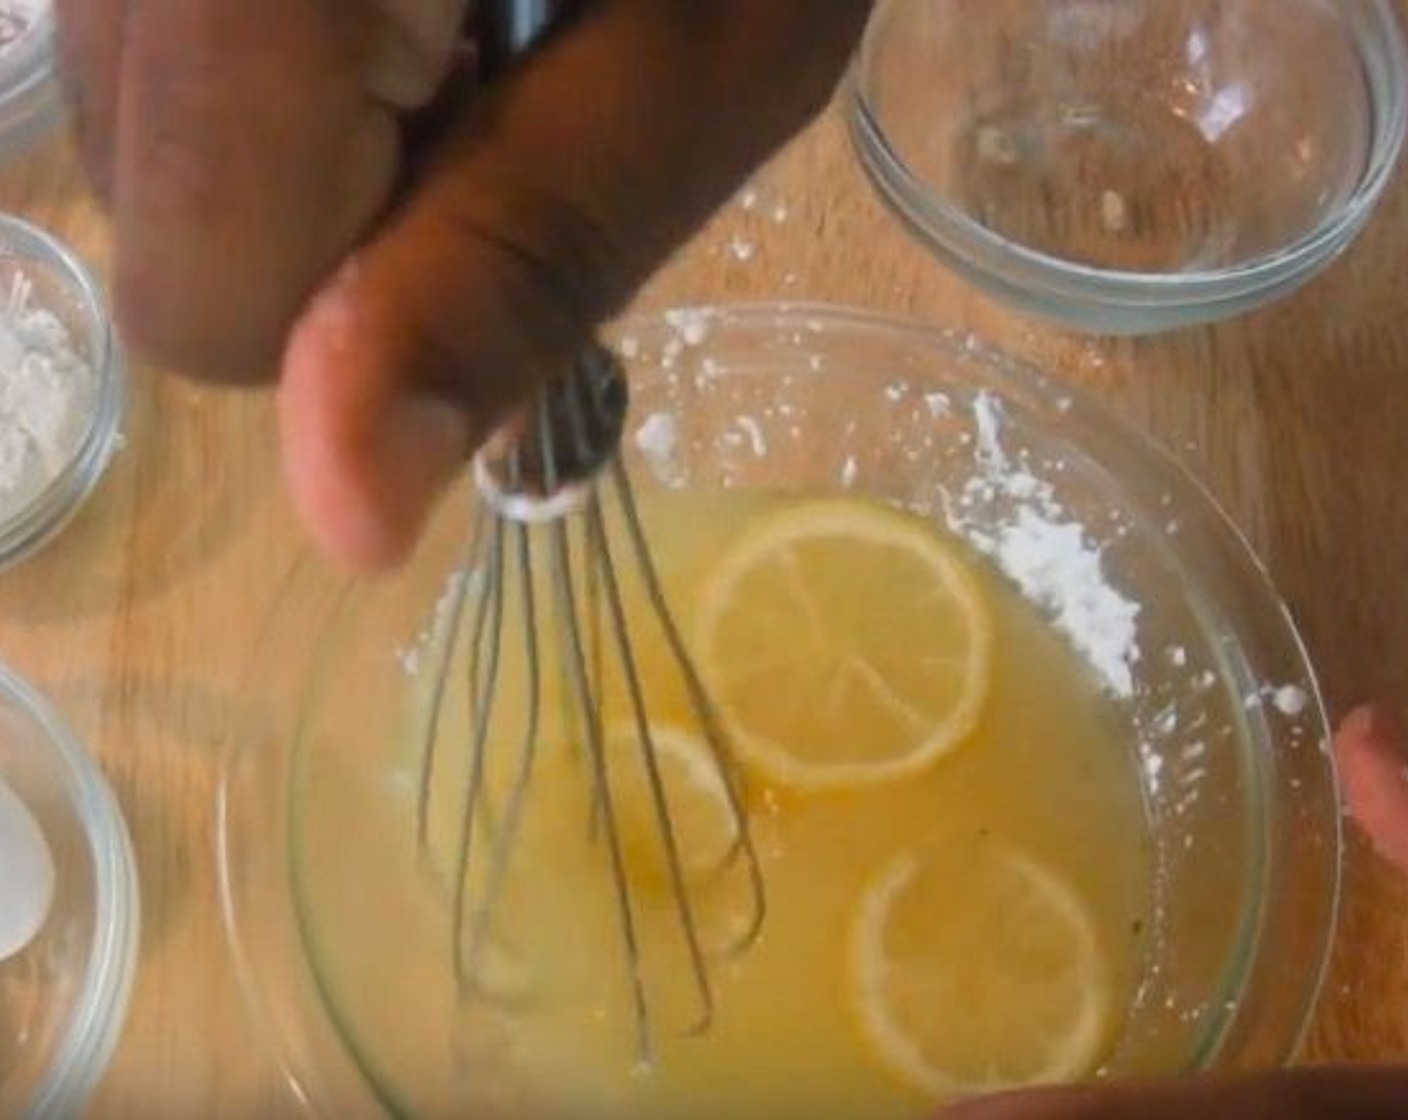 step 2 Into another bowl, add Chicken Broth (1 cup), Granulated Sugar (1/3 cup), juice from Lemon (1), Corn Starch (1 1/2 Tbsp), Salt (3/4 tsp), and Lemons (3 slices). Stir to combine.